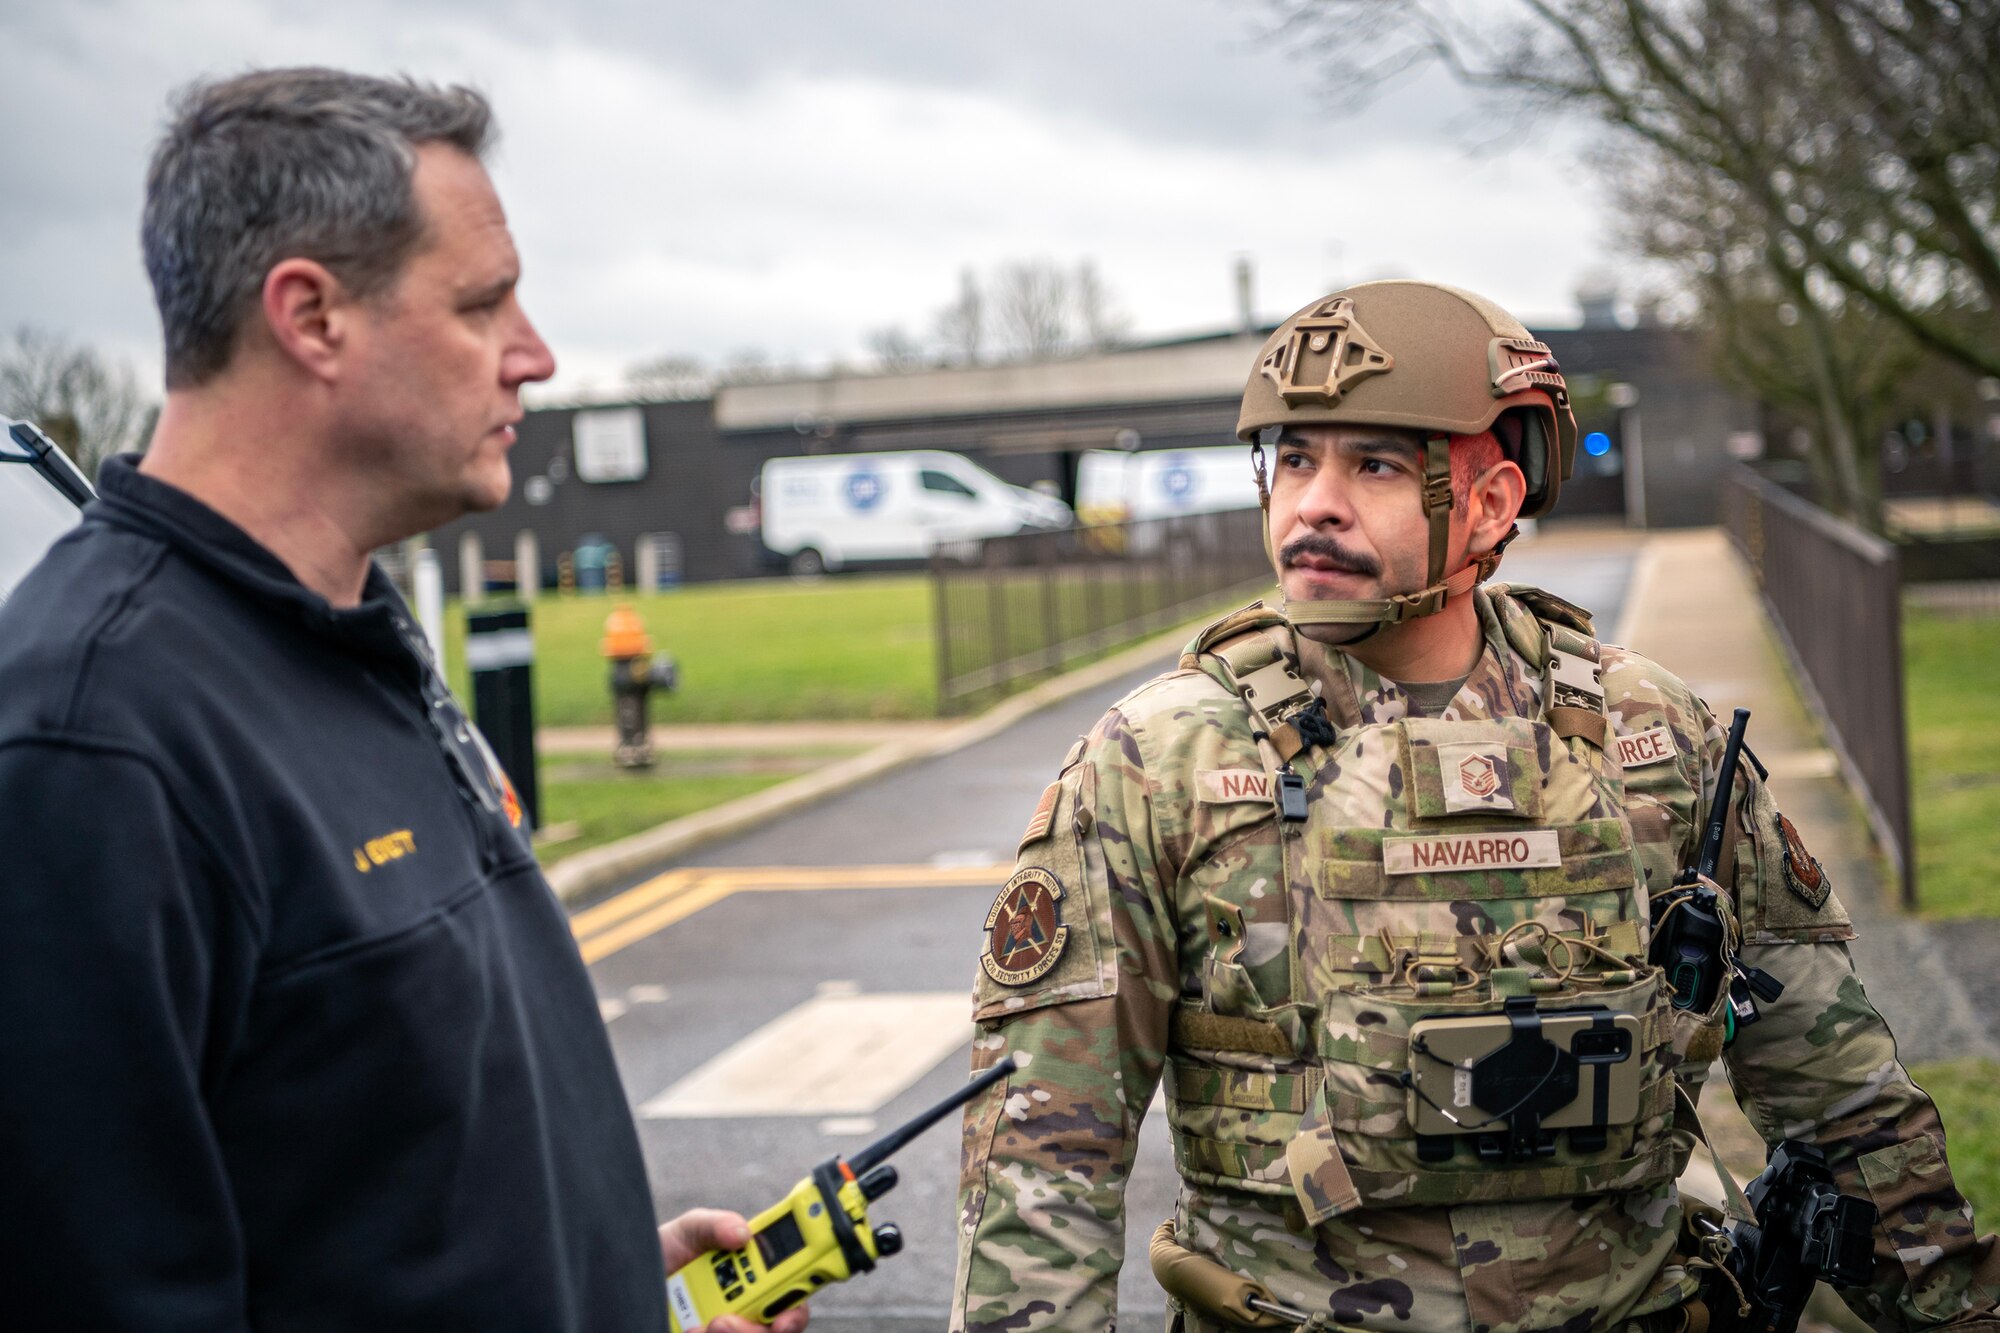 U.S. Air Force Master Sgt. Christian Navarro-Salazar, right, 423d Security Forces Squadron supply and logistics superintendent, speaks with Jeremy Evett, 423d Civil Engineer Squadron fire chief, during an active shooter exercise at RAF Alconbury, England, March 16, 2023. The exercise tested the 501st Combat Support Wing on overall readiness and ability to respond to an emergency situation. (U.S. Air Force photo by Staff Sgt. Eugene Oliver)